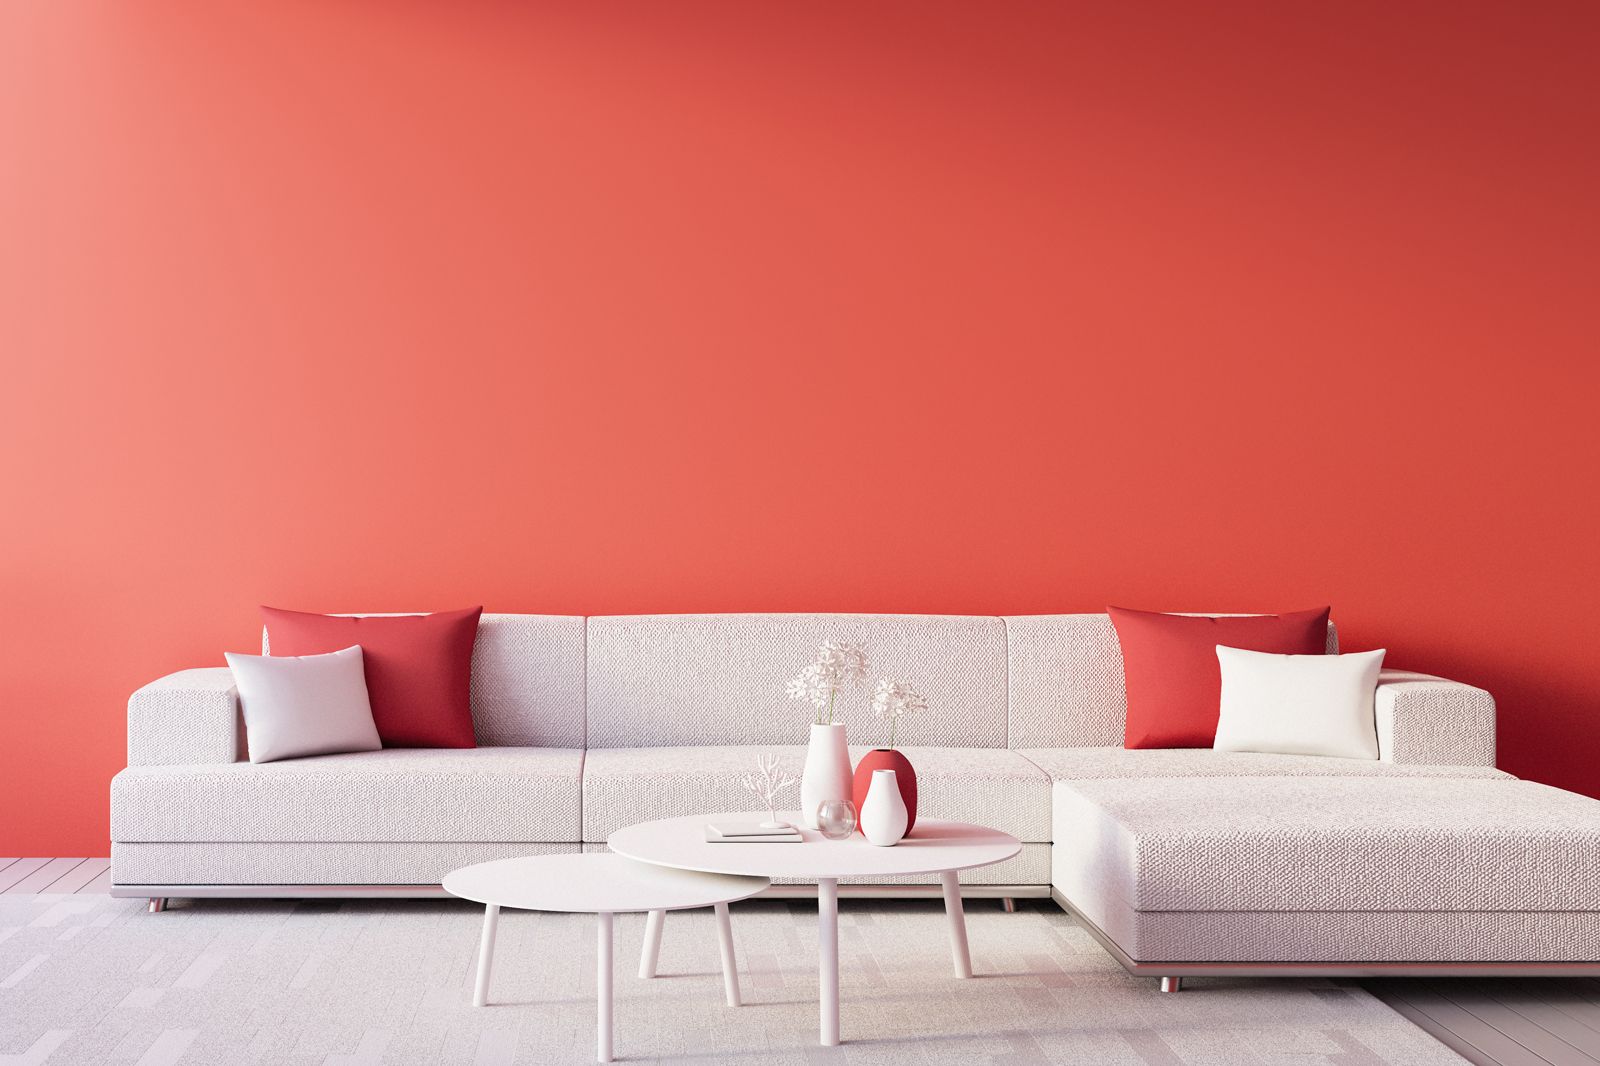 How to Decorate Your Home With Pantone's Color of the Year: Coral - Lars Remodel